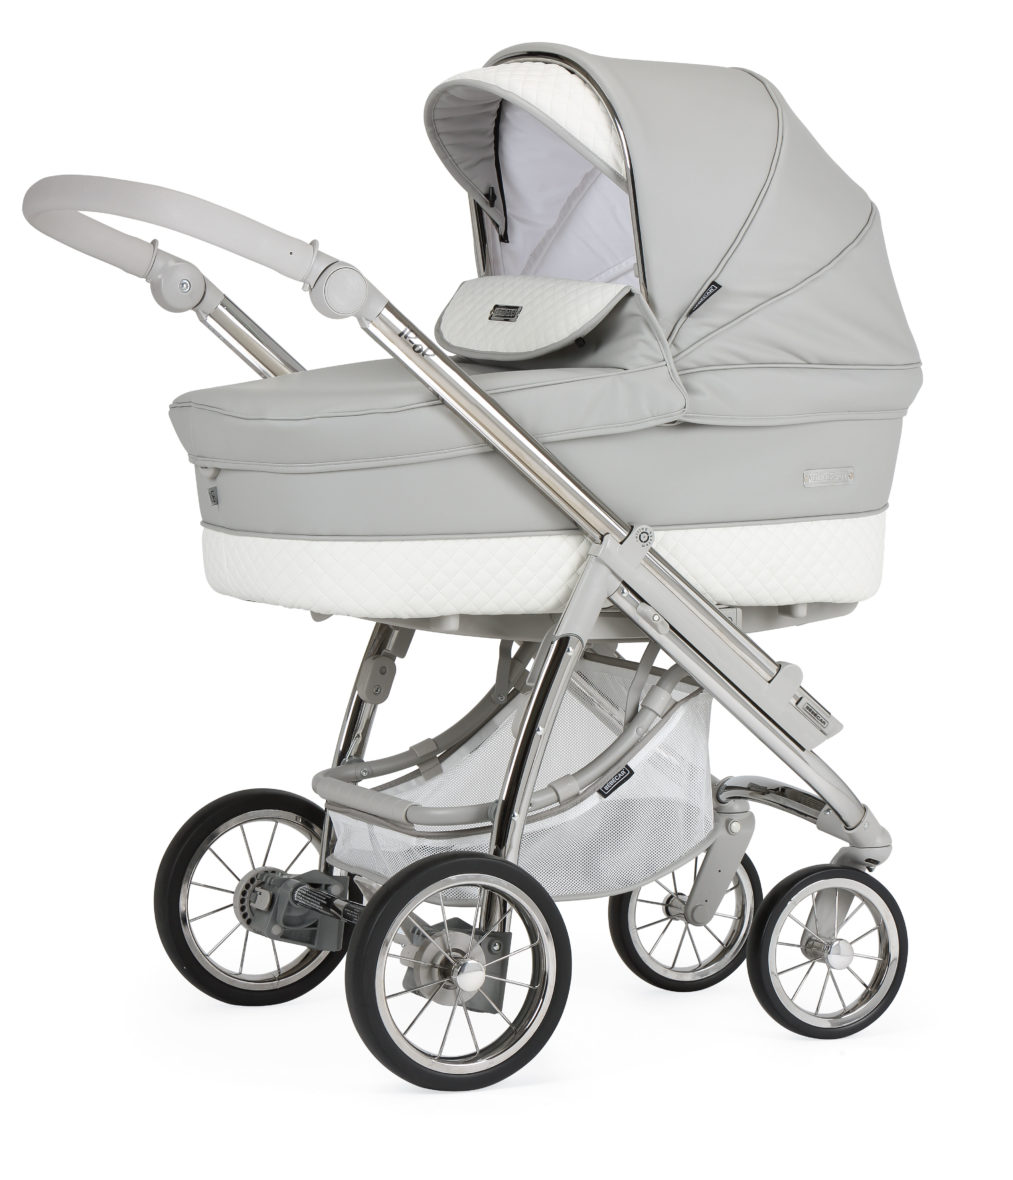 Bebecar Pack Ip Op Classic XL Pram Combination Travel System – Silver Grey